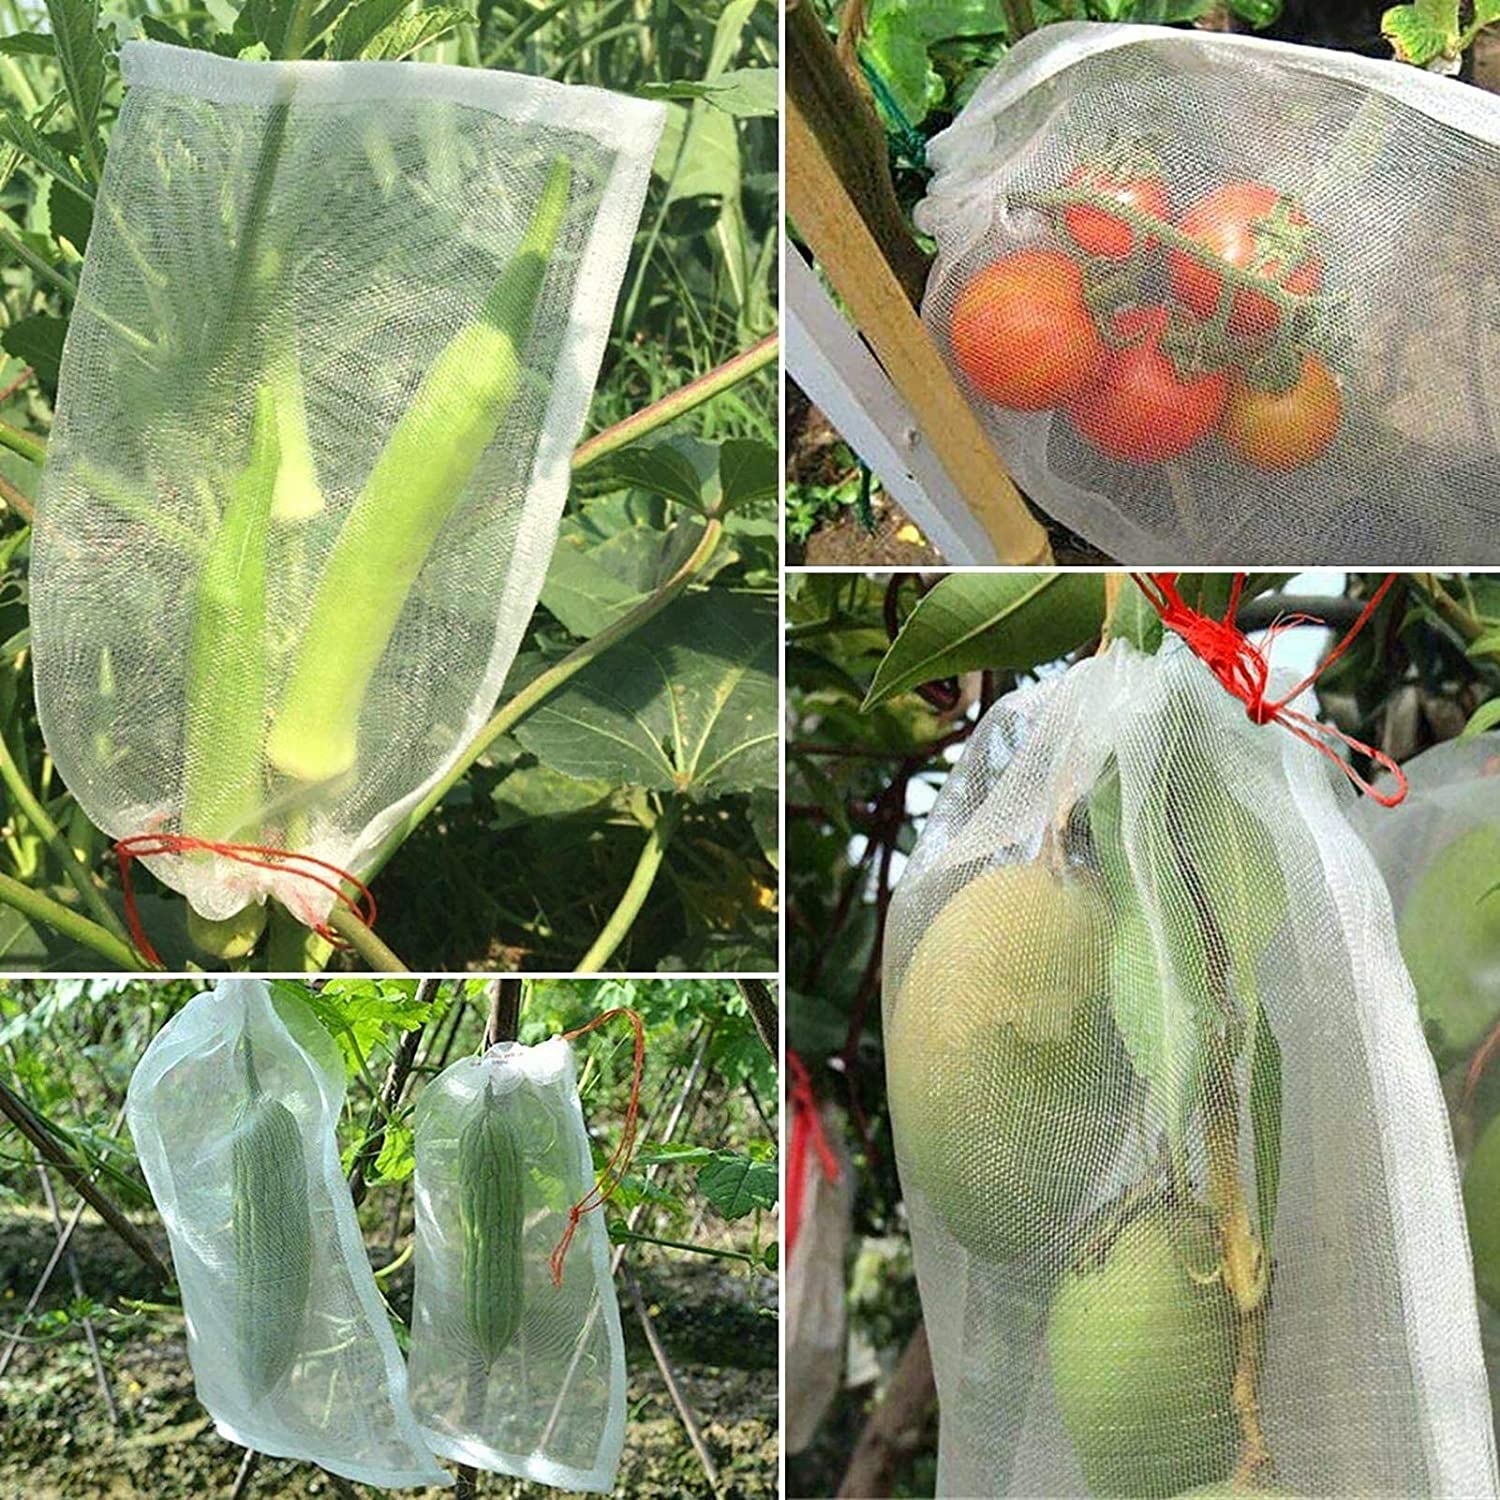 Buy Mesh Bags for Fruit and Vegetable Hanging Storage for Potato Onions  Green Pepper Fruits Garlic 2 Size - Pack of 4 Online at Low Prices in India  - Amazon.in